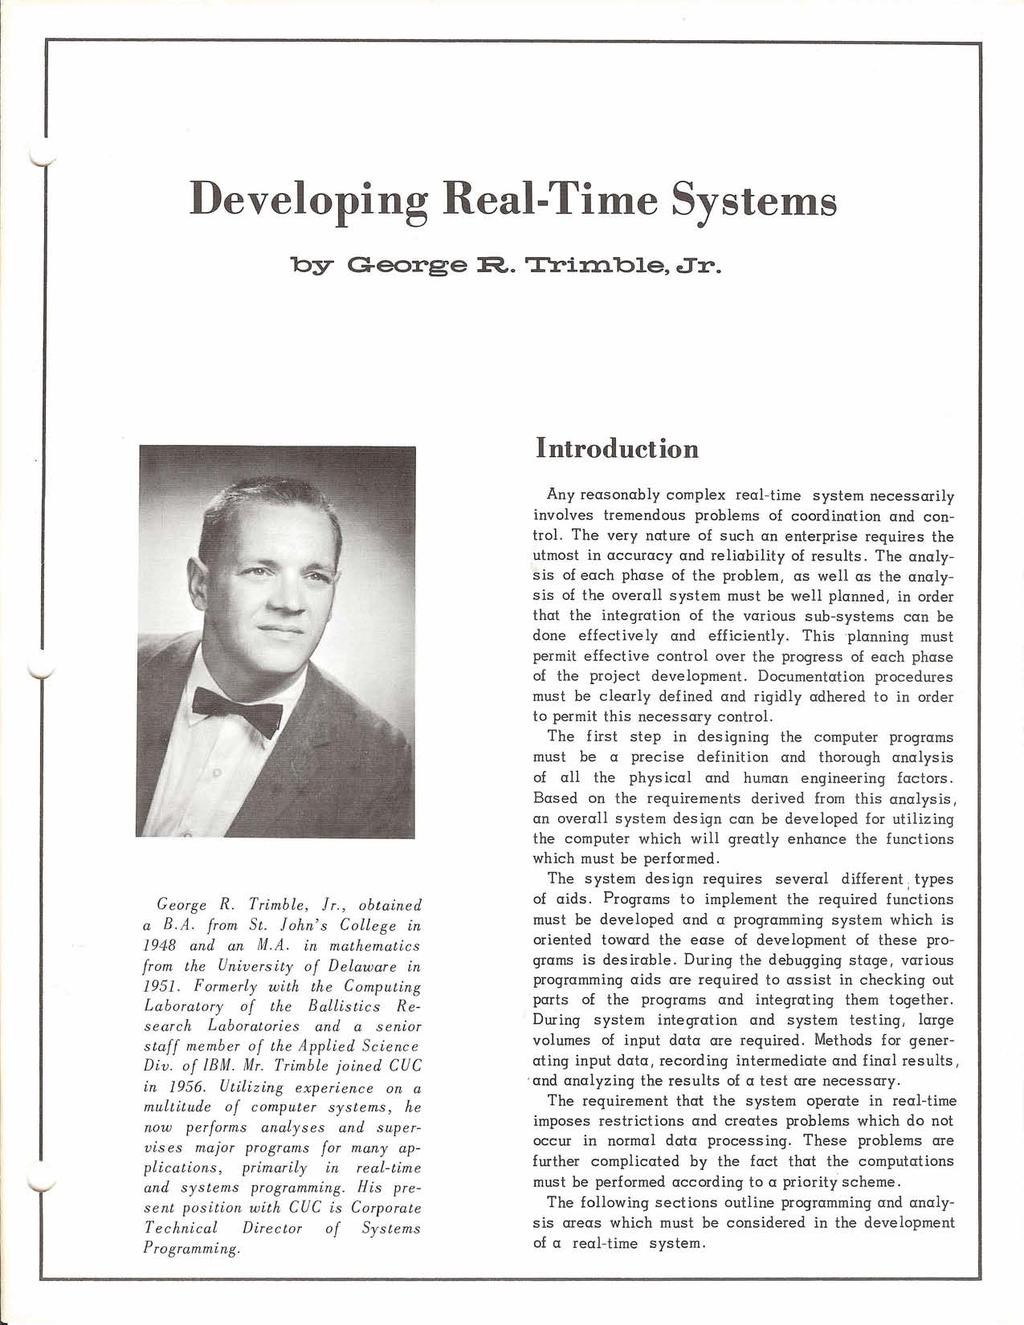 Developing Real-Time Systems by George R. Dimble, Jr. Introduction George R. Trimble, Jr., obtained a B.A. from St. John's College in 1948 and an M.A. in mathematics from the University of Delaware in 1951.